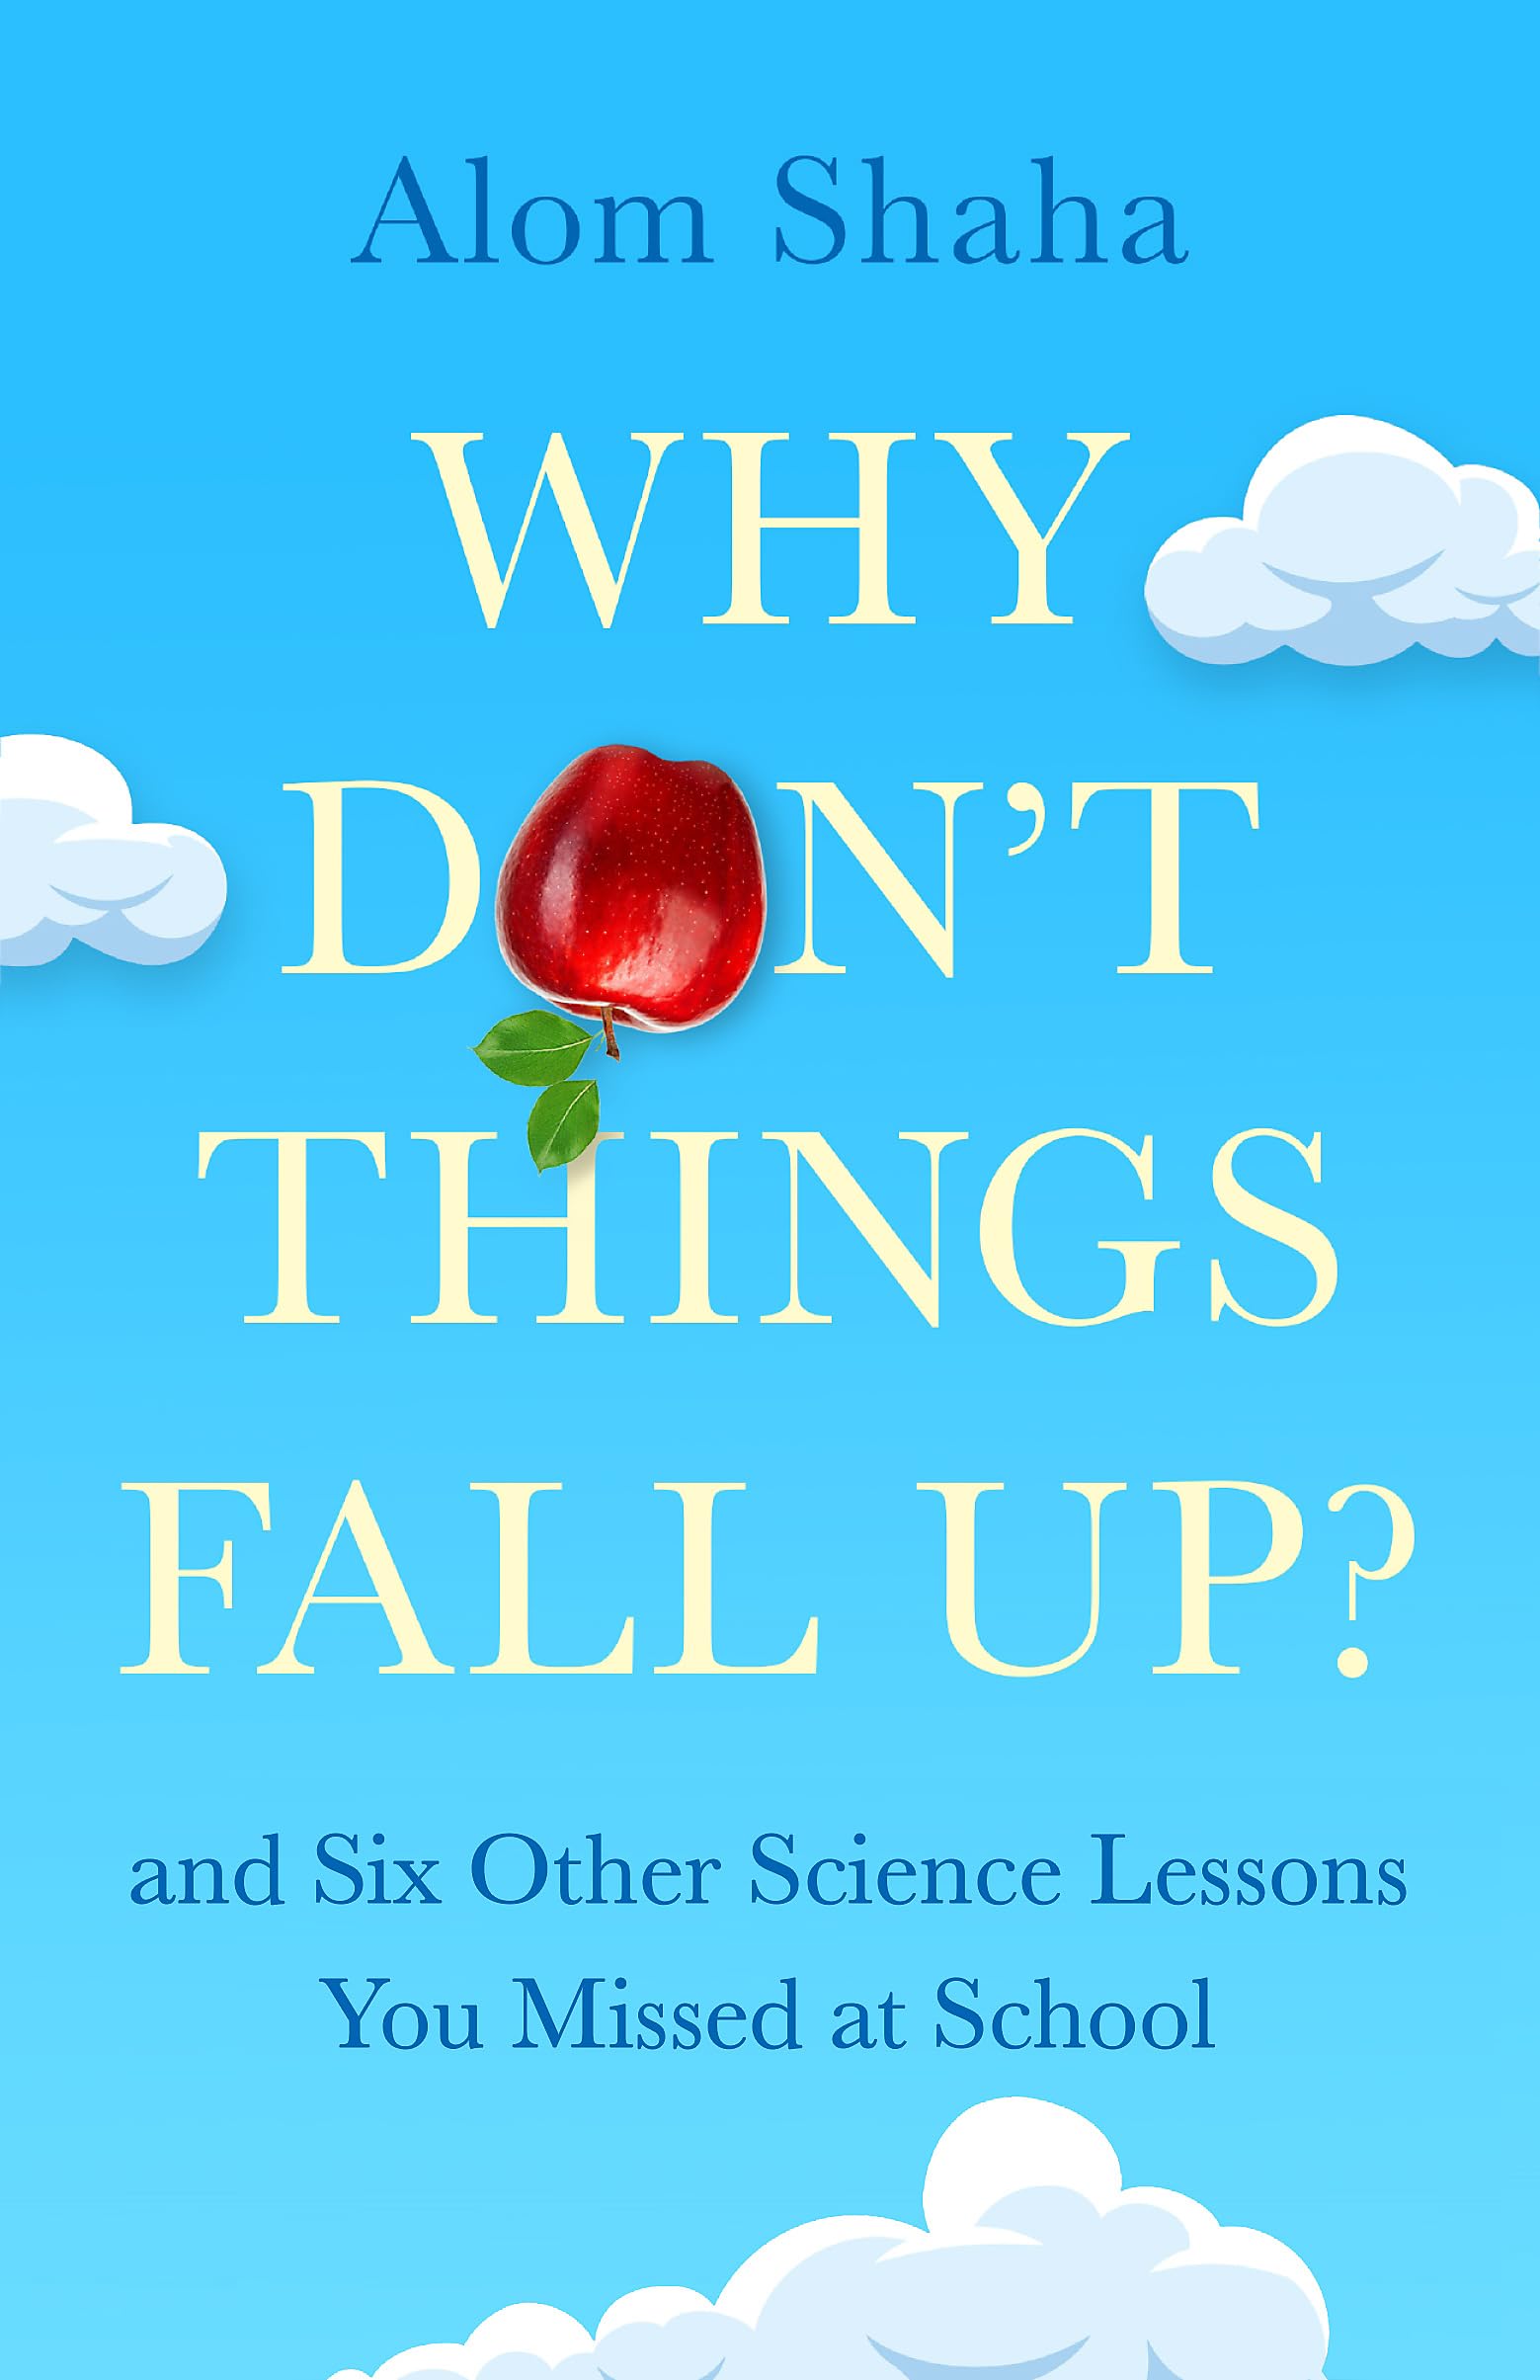 Why Don't Things Fall Up?